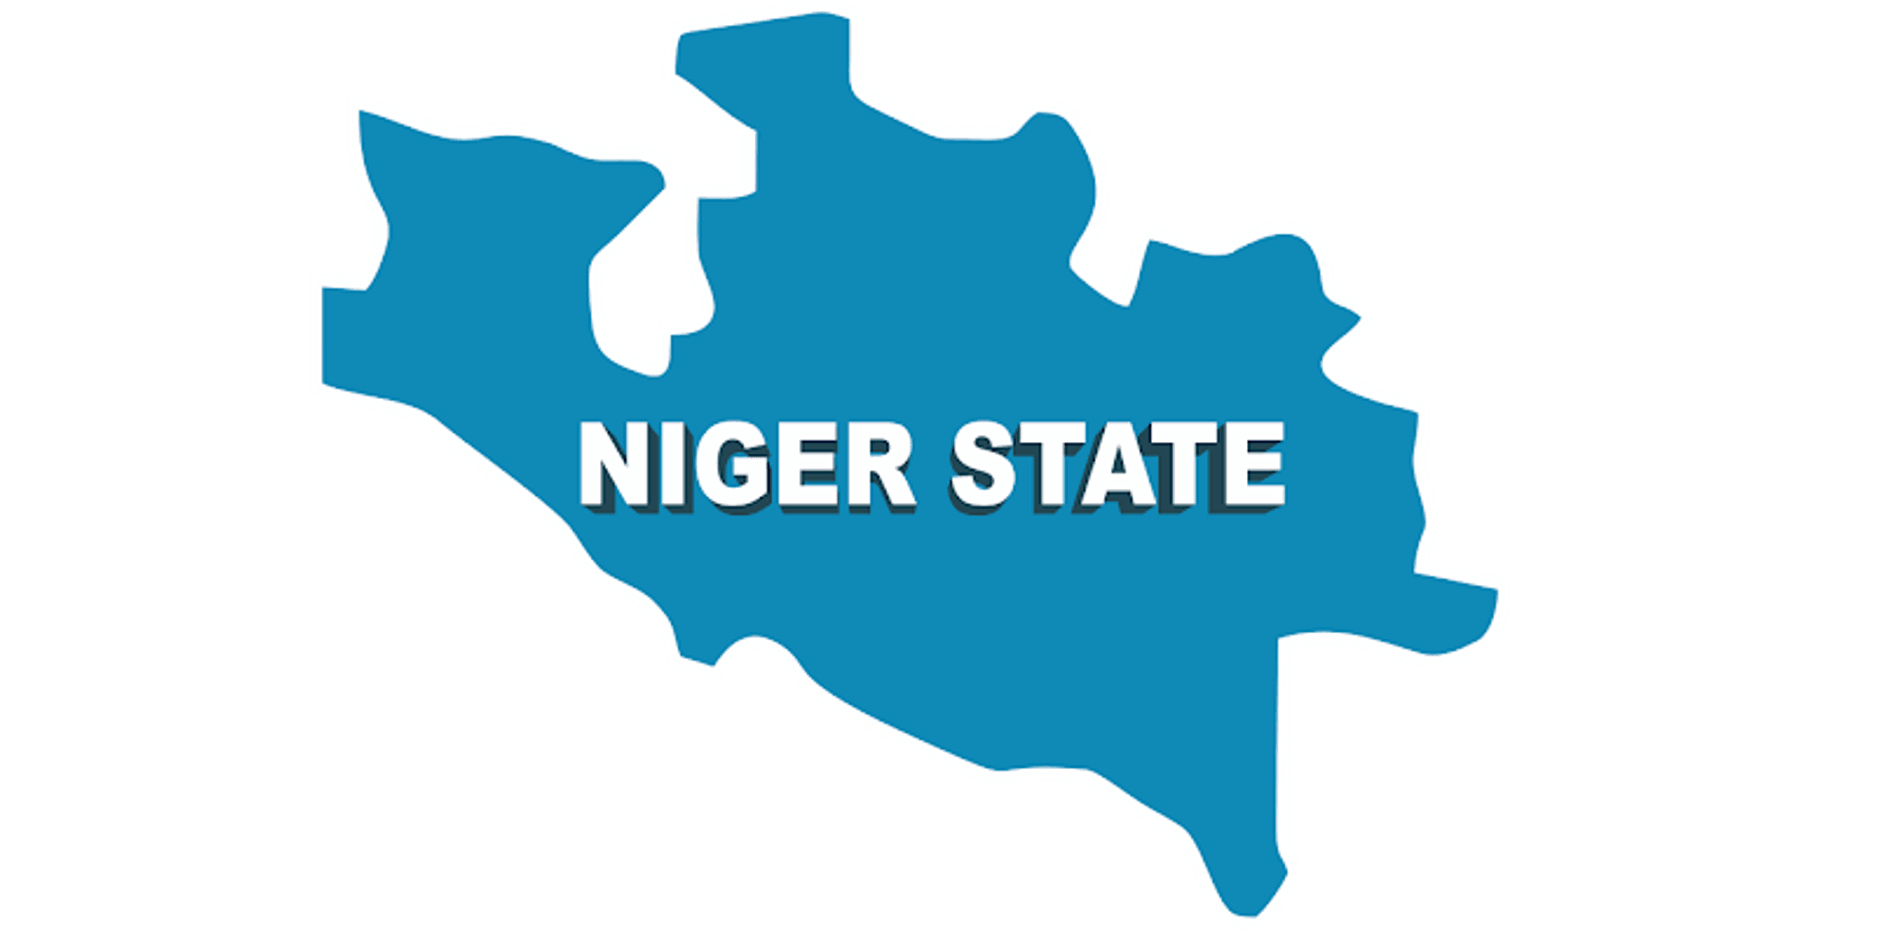 Male Organ Goes 'Missing' Inside Niger Government House